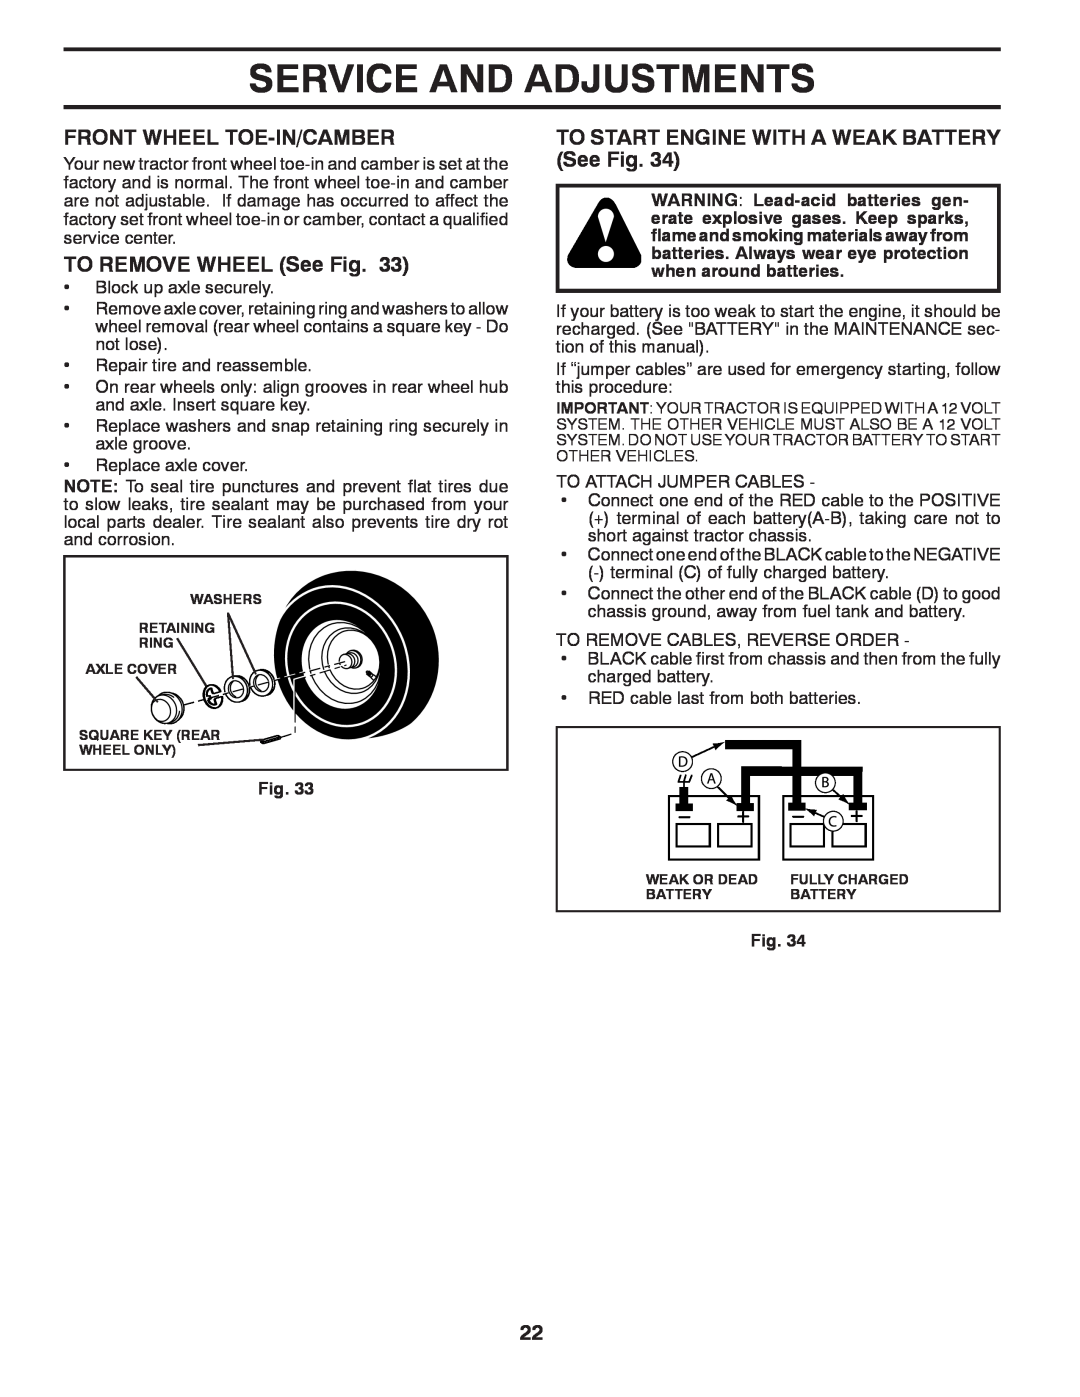 Poulan PB22H46YT warranty Service And Adjustments, Front Wheel Toe-In/Camber, TO REMOVE WHEEL See Fig 